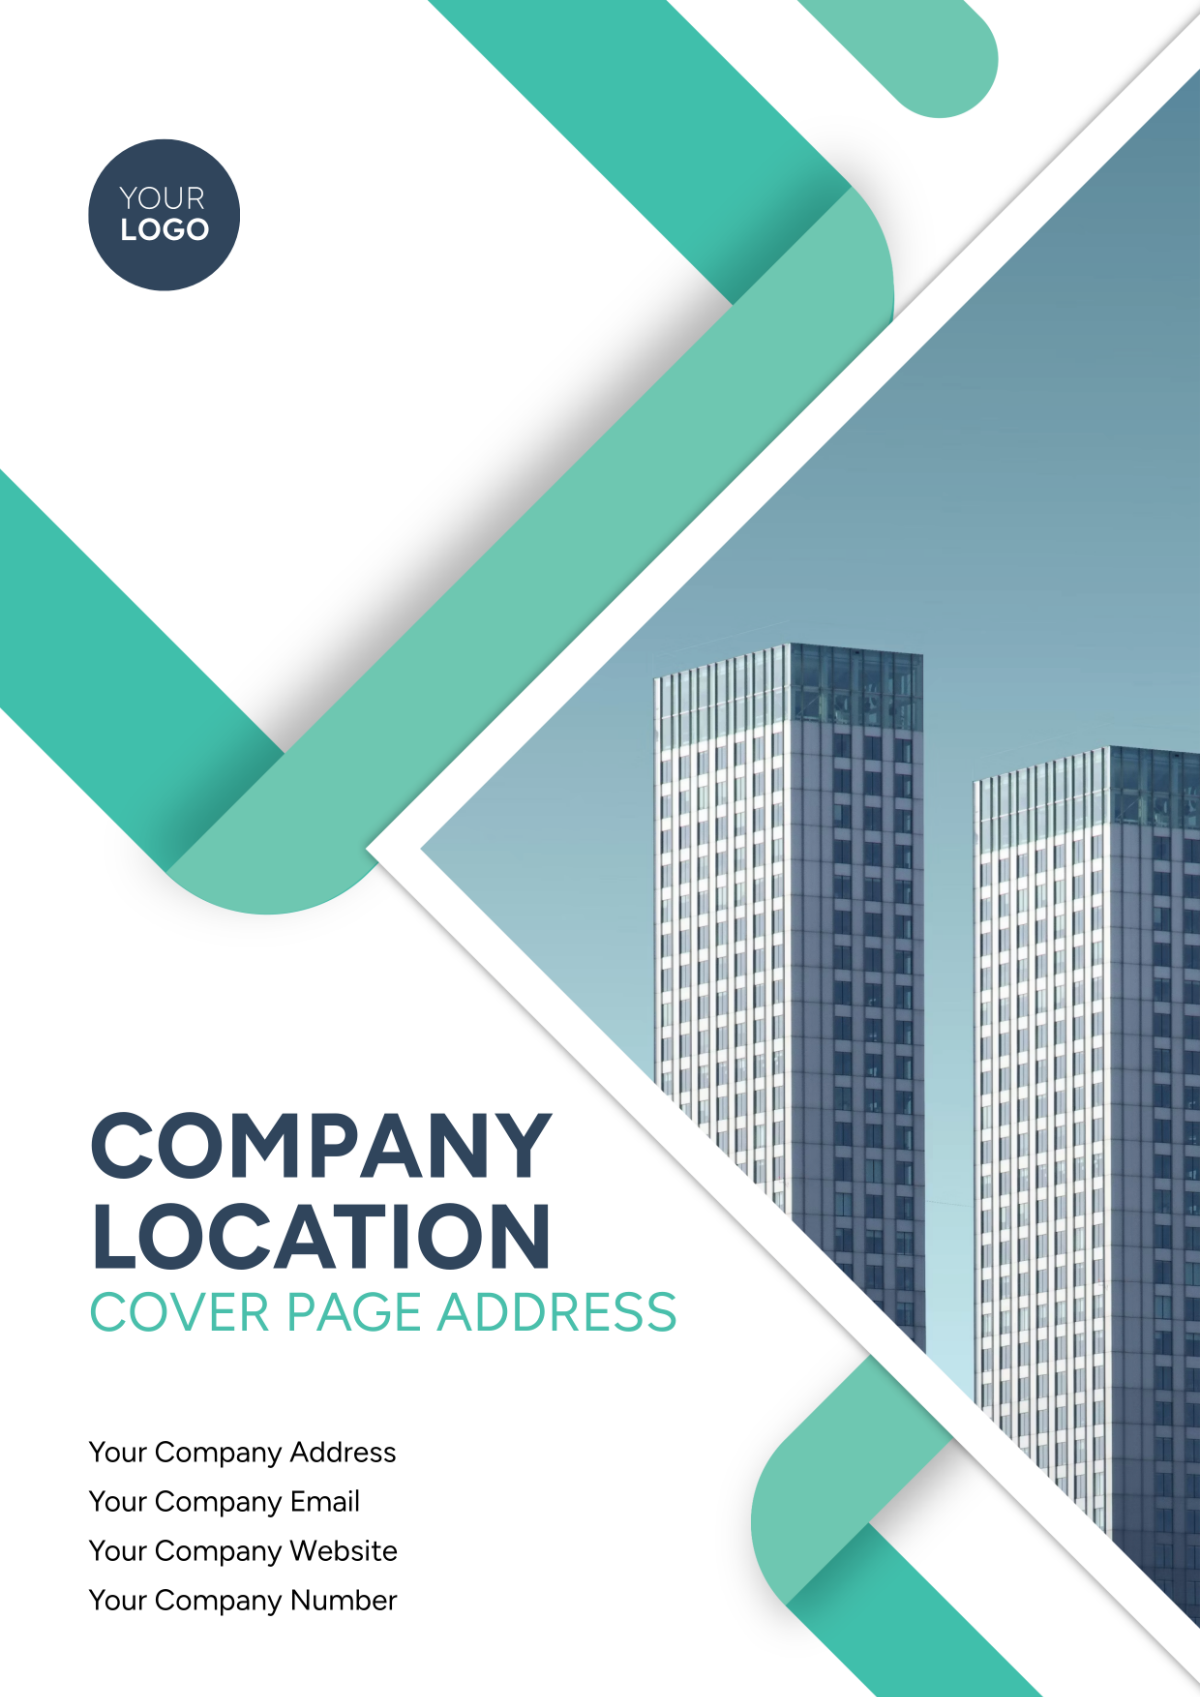 Company Location Cover Page Address